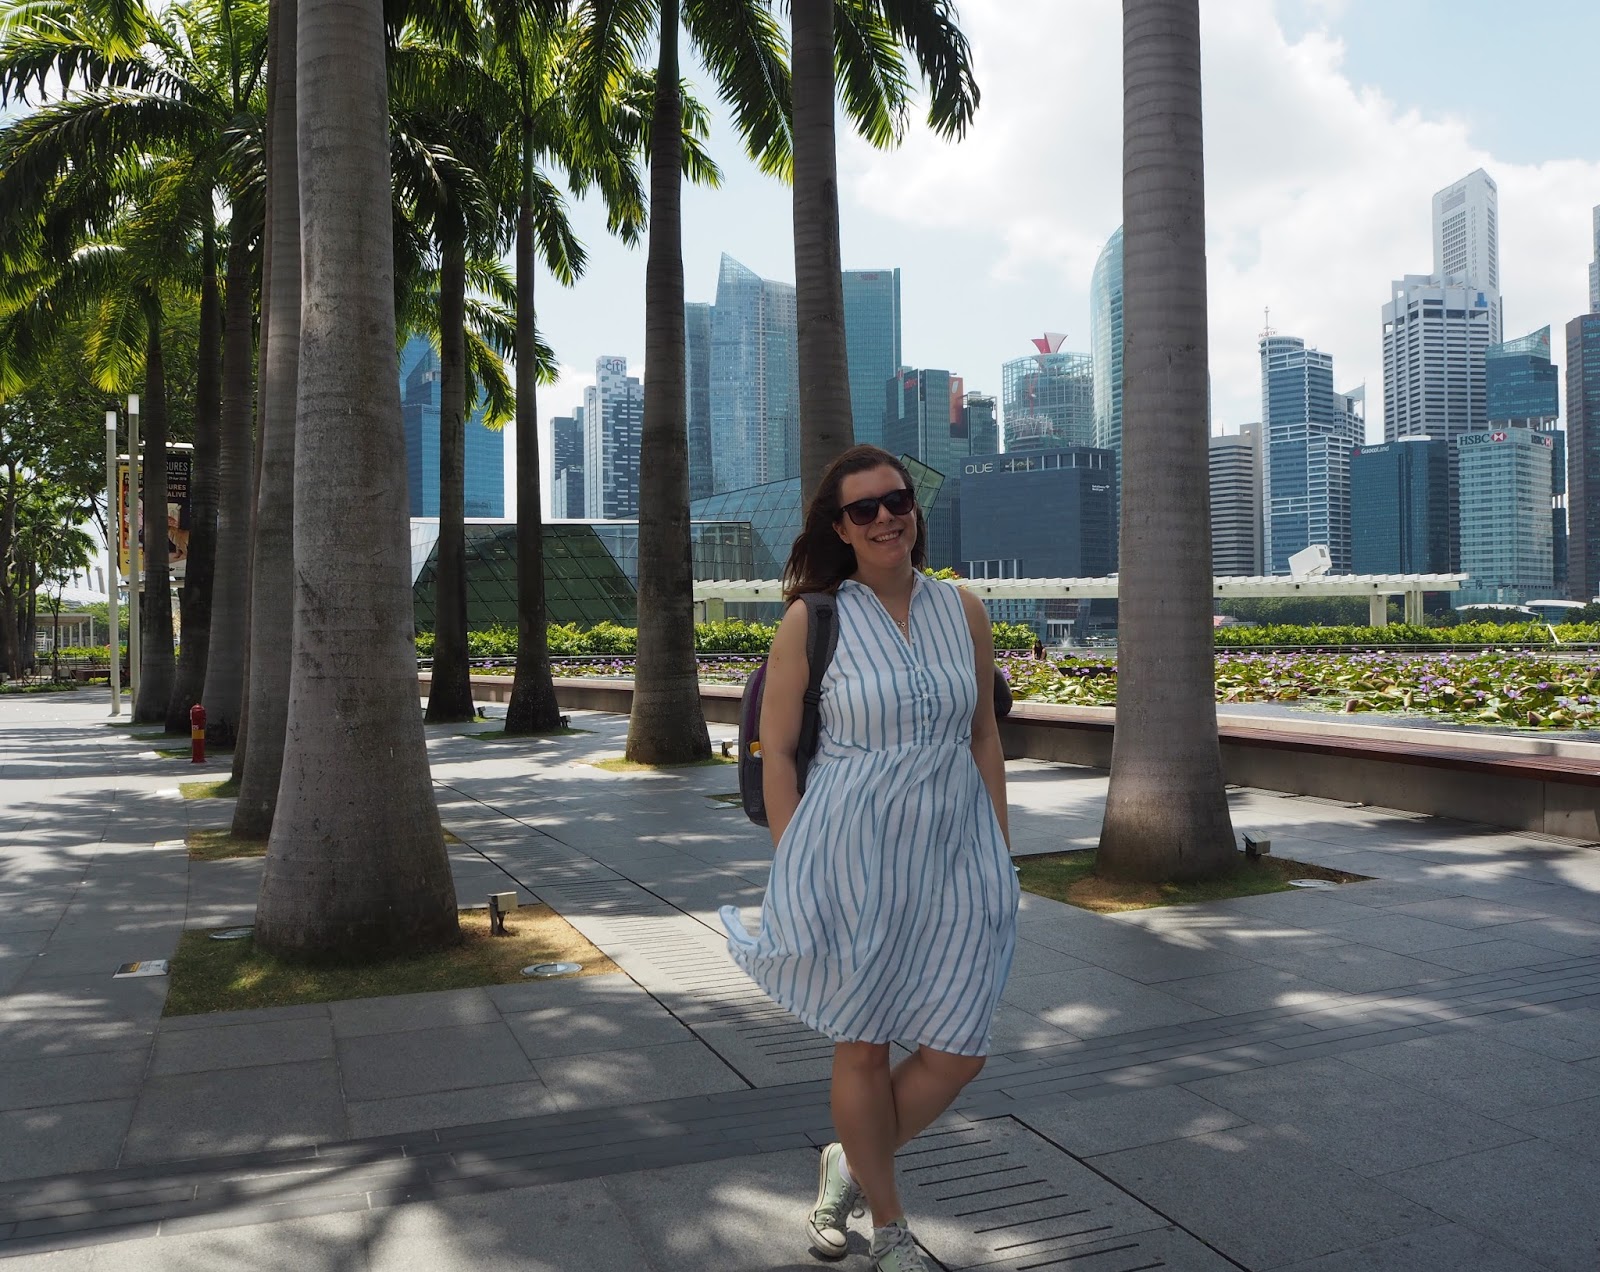 Postcards from Singapore